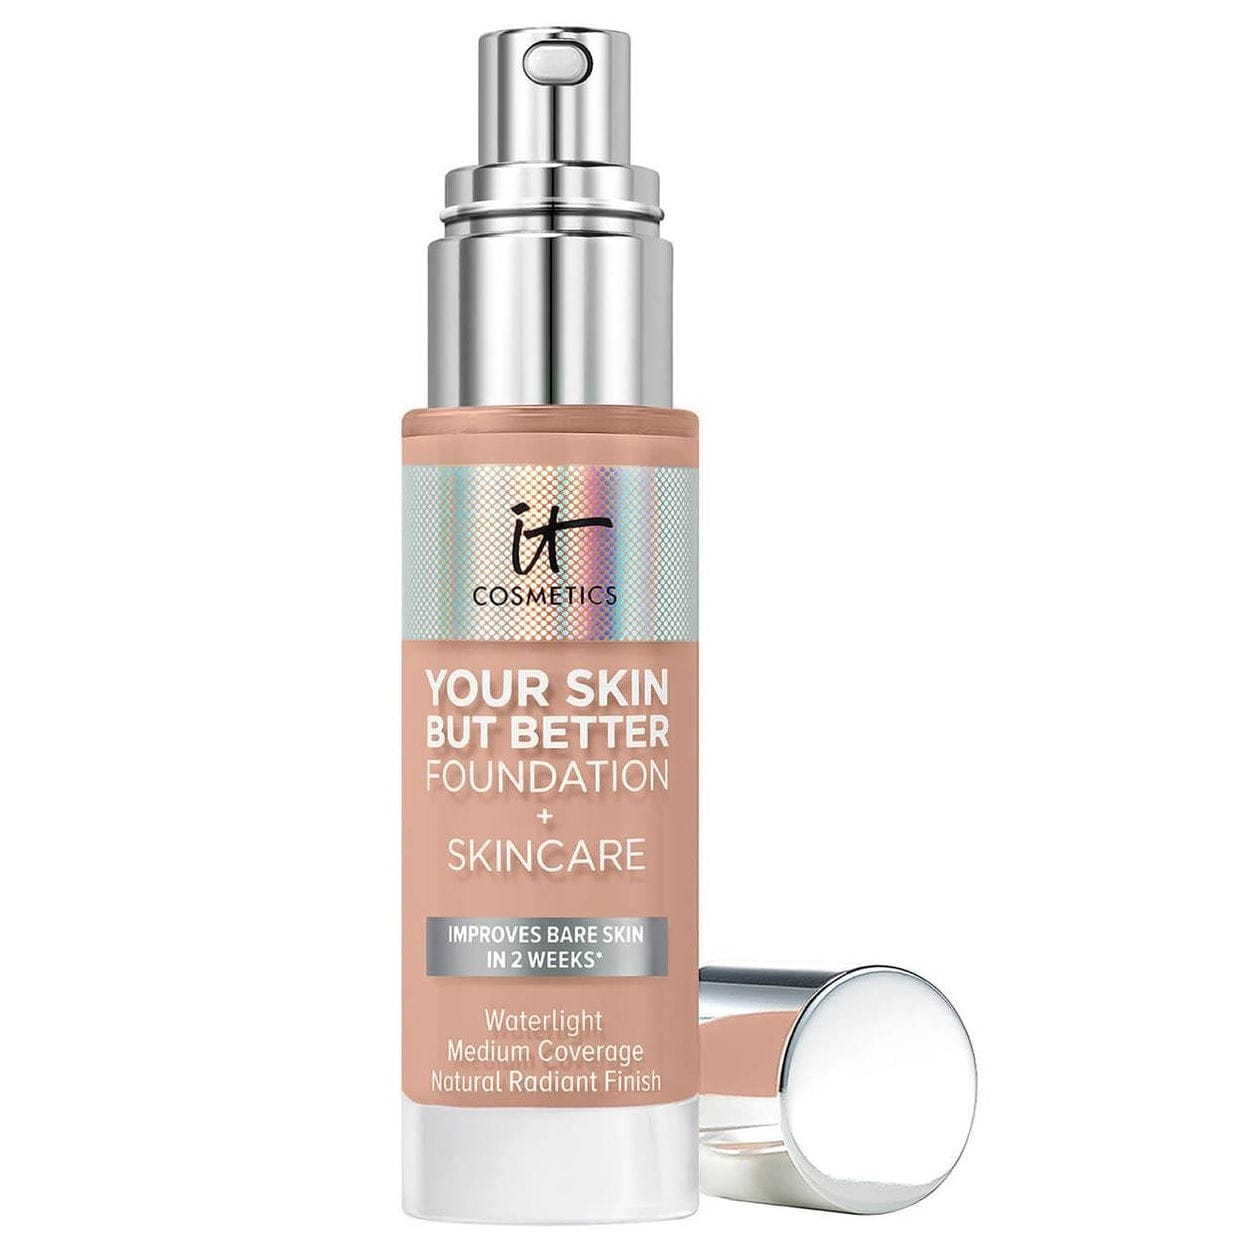 IT COSMETICS Beauty IT Cosmetics Your Skin But Better Foundation and Skincare 30ml - 36 Medium Cool